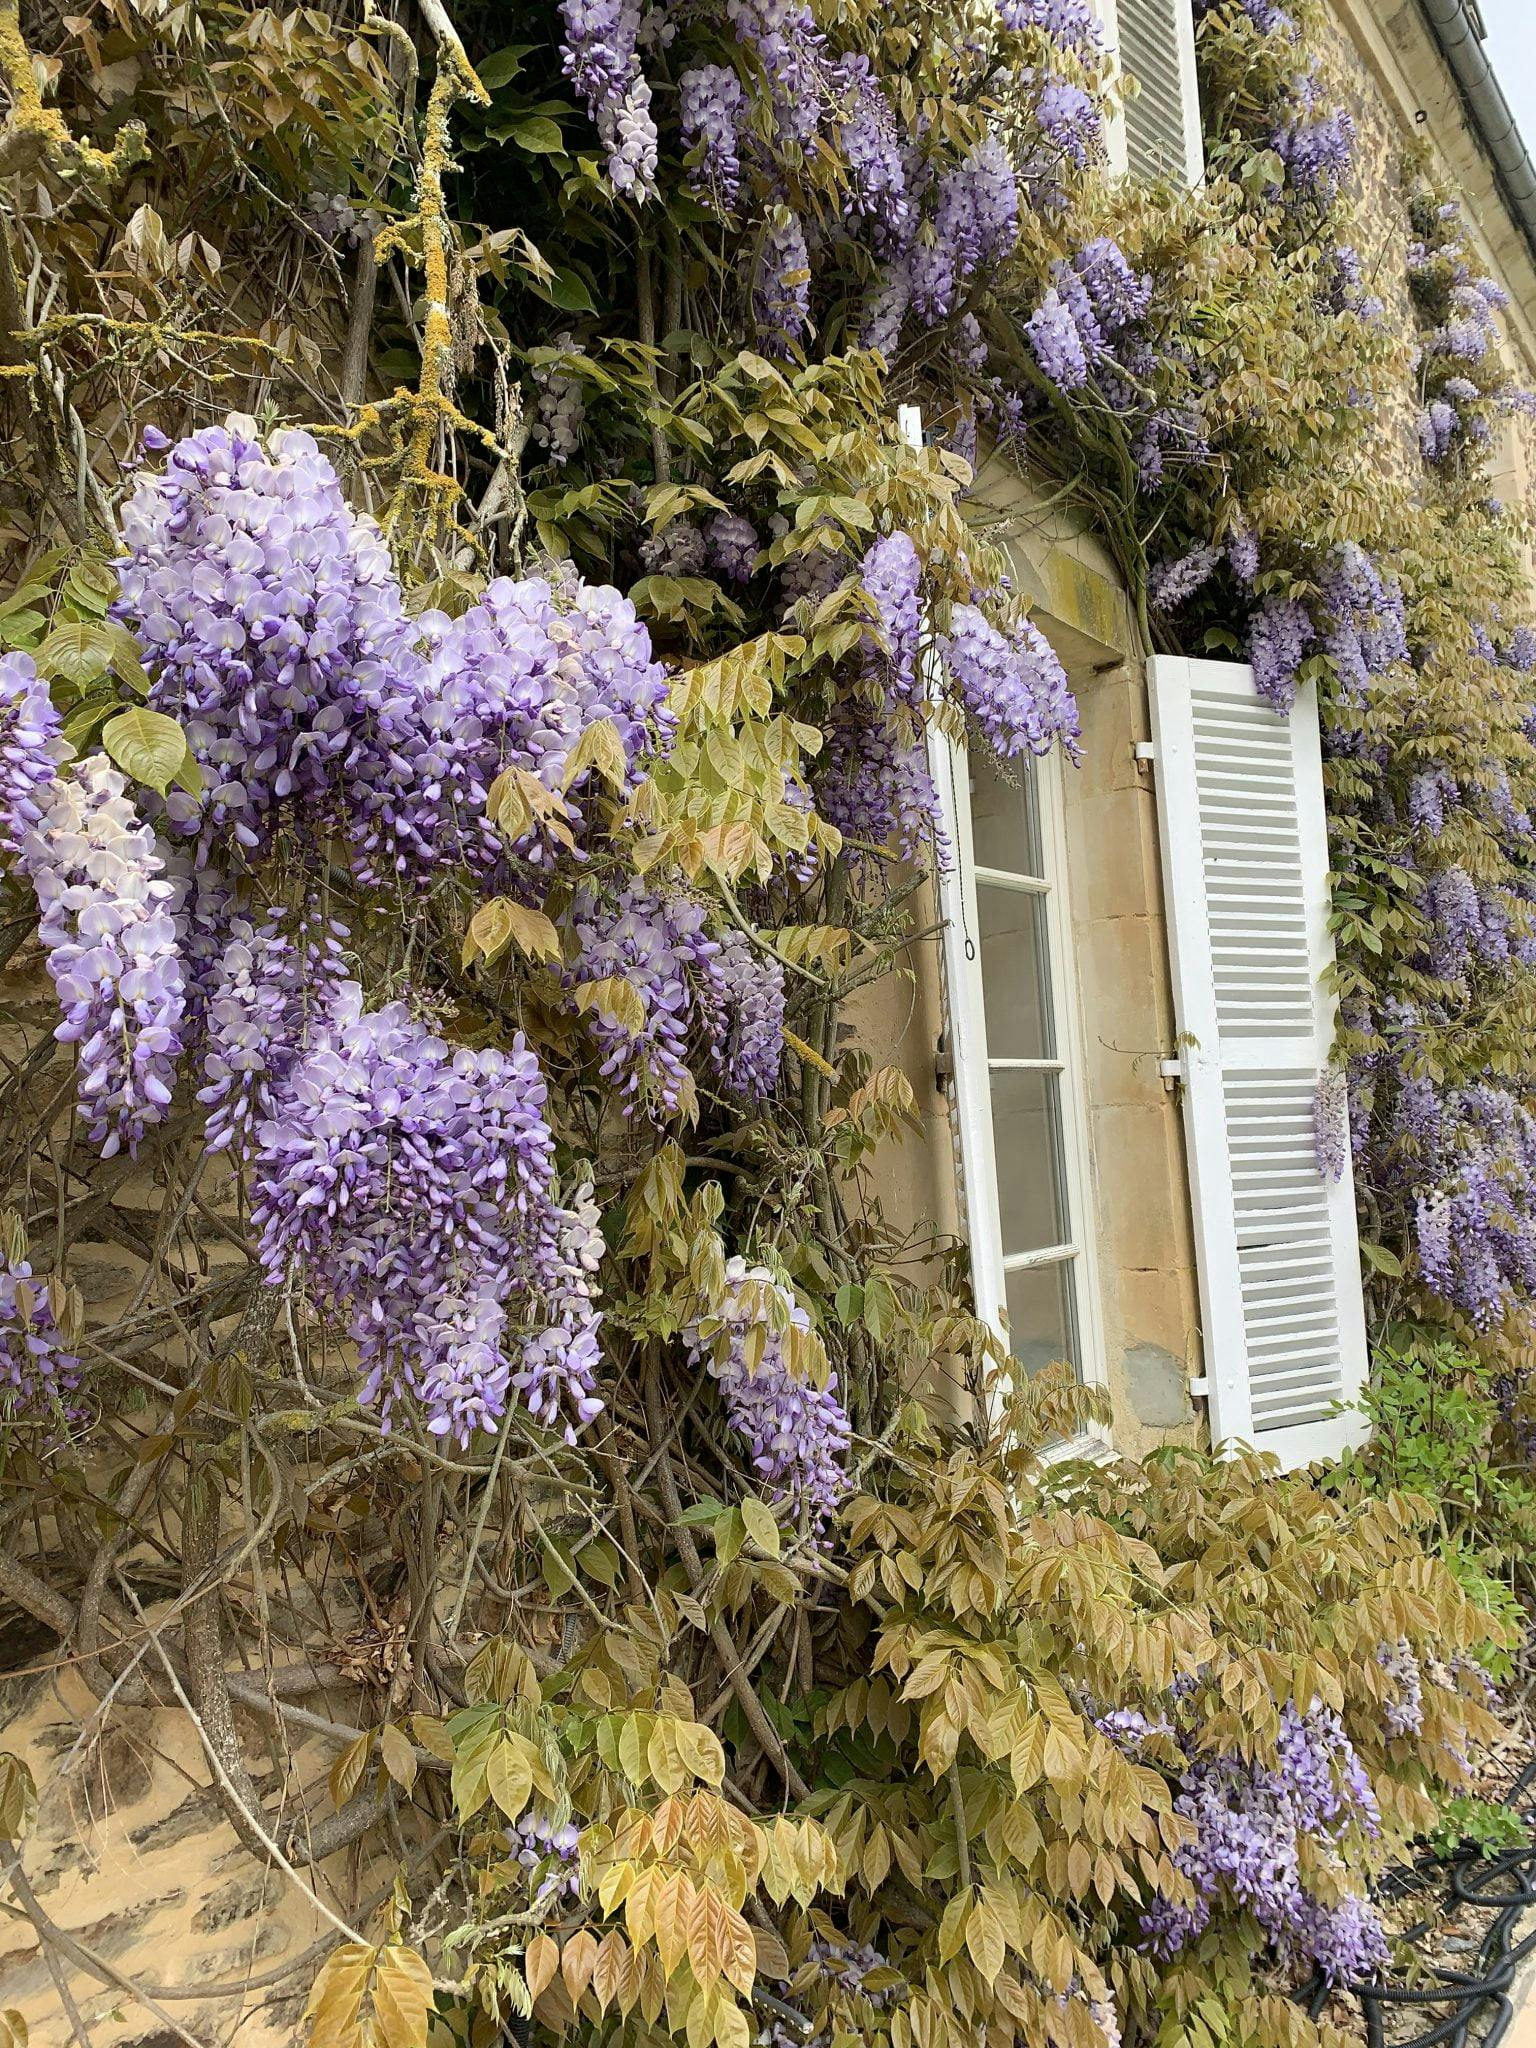 flower-filled facade of the house